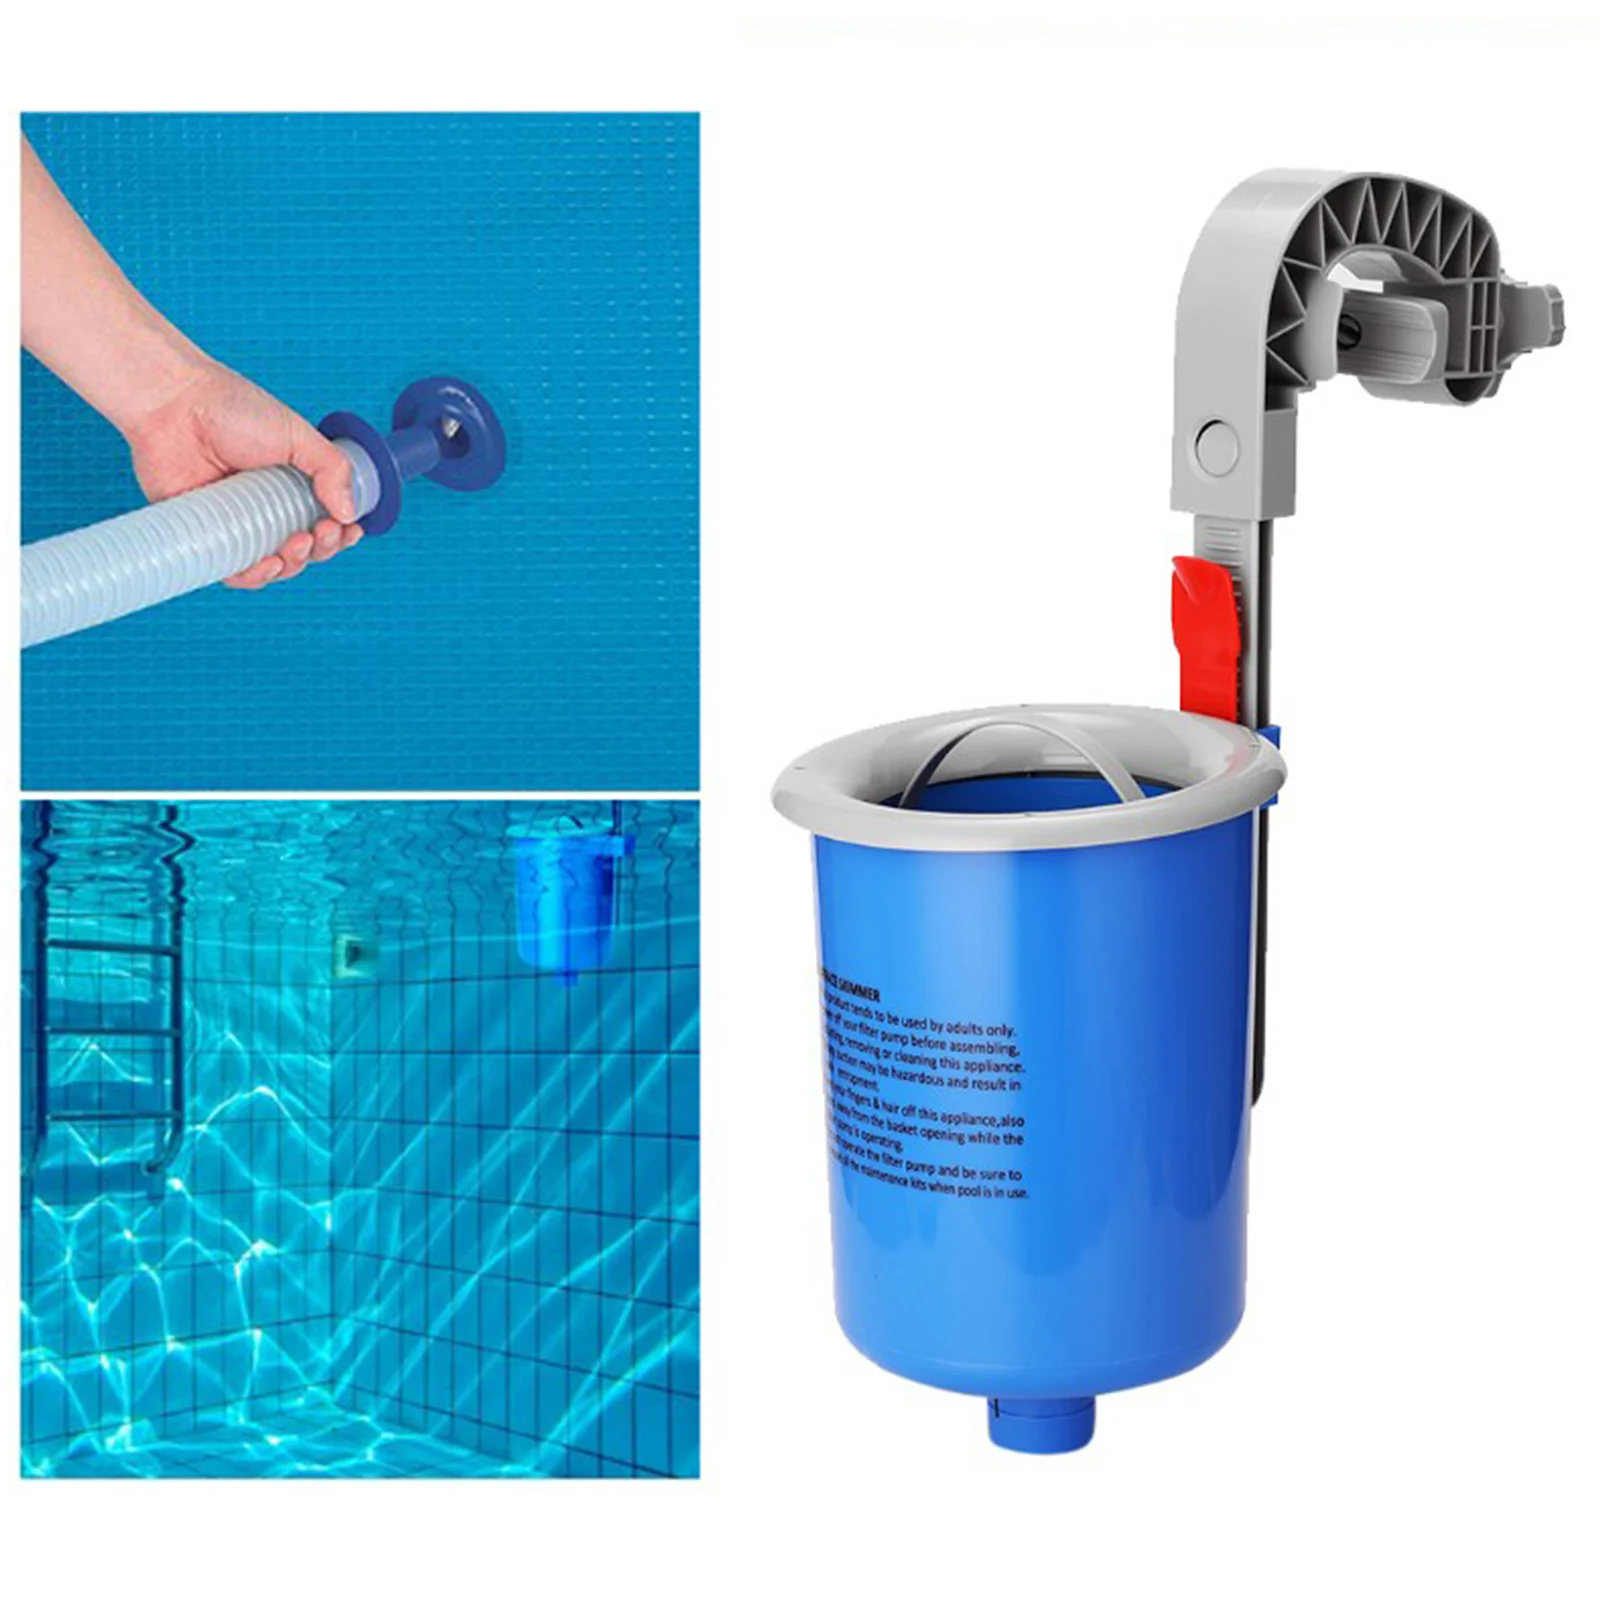 Wall-Mounted Swimming Pool Skimmer Surface Floater Debris Cleaner for Cleaning